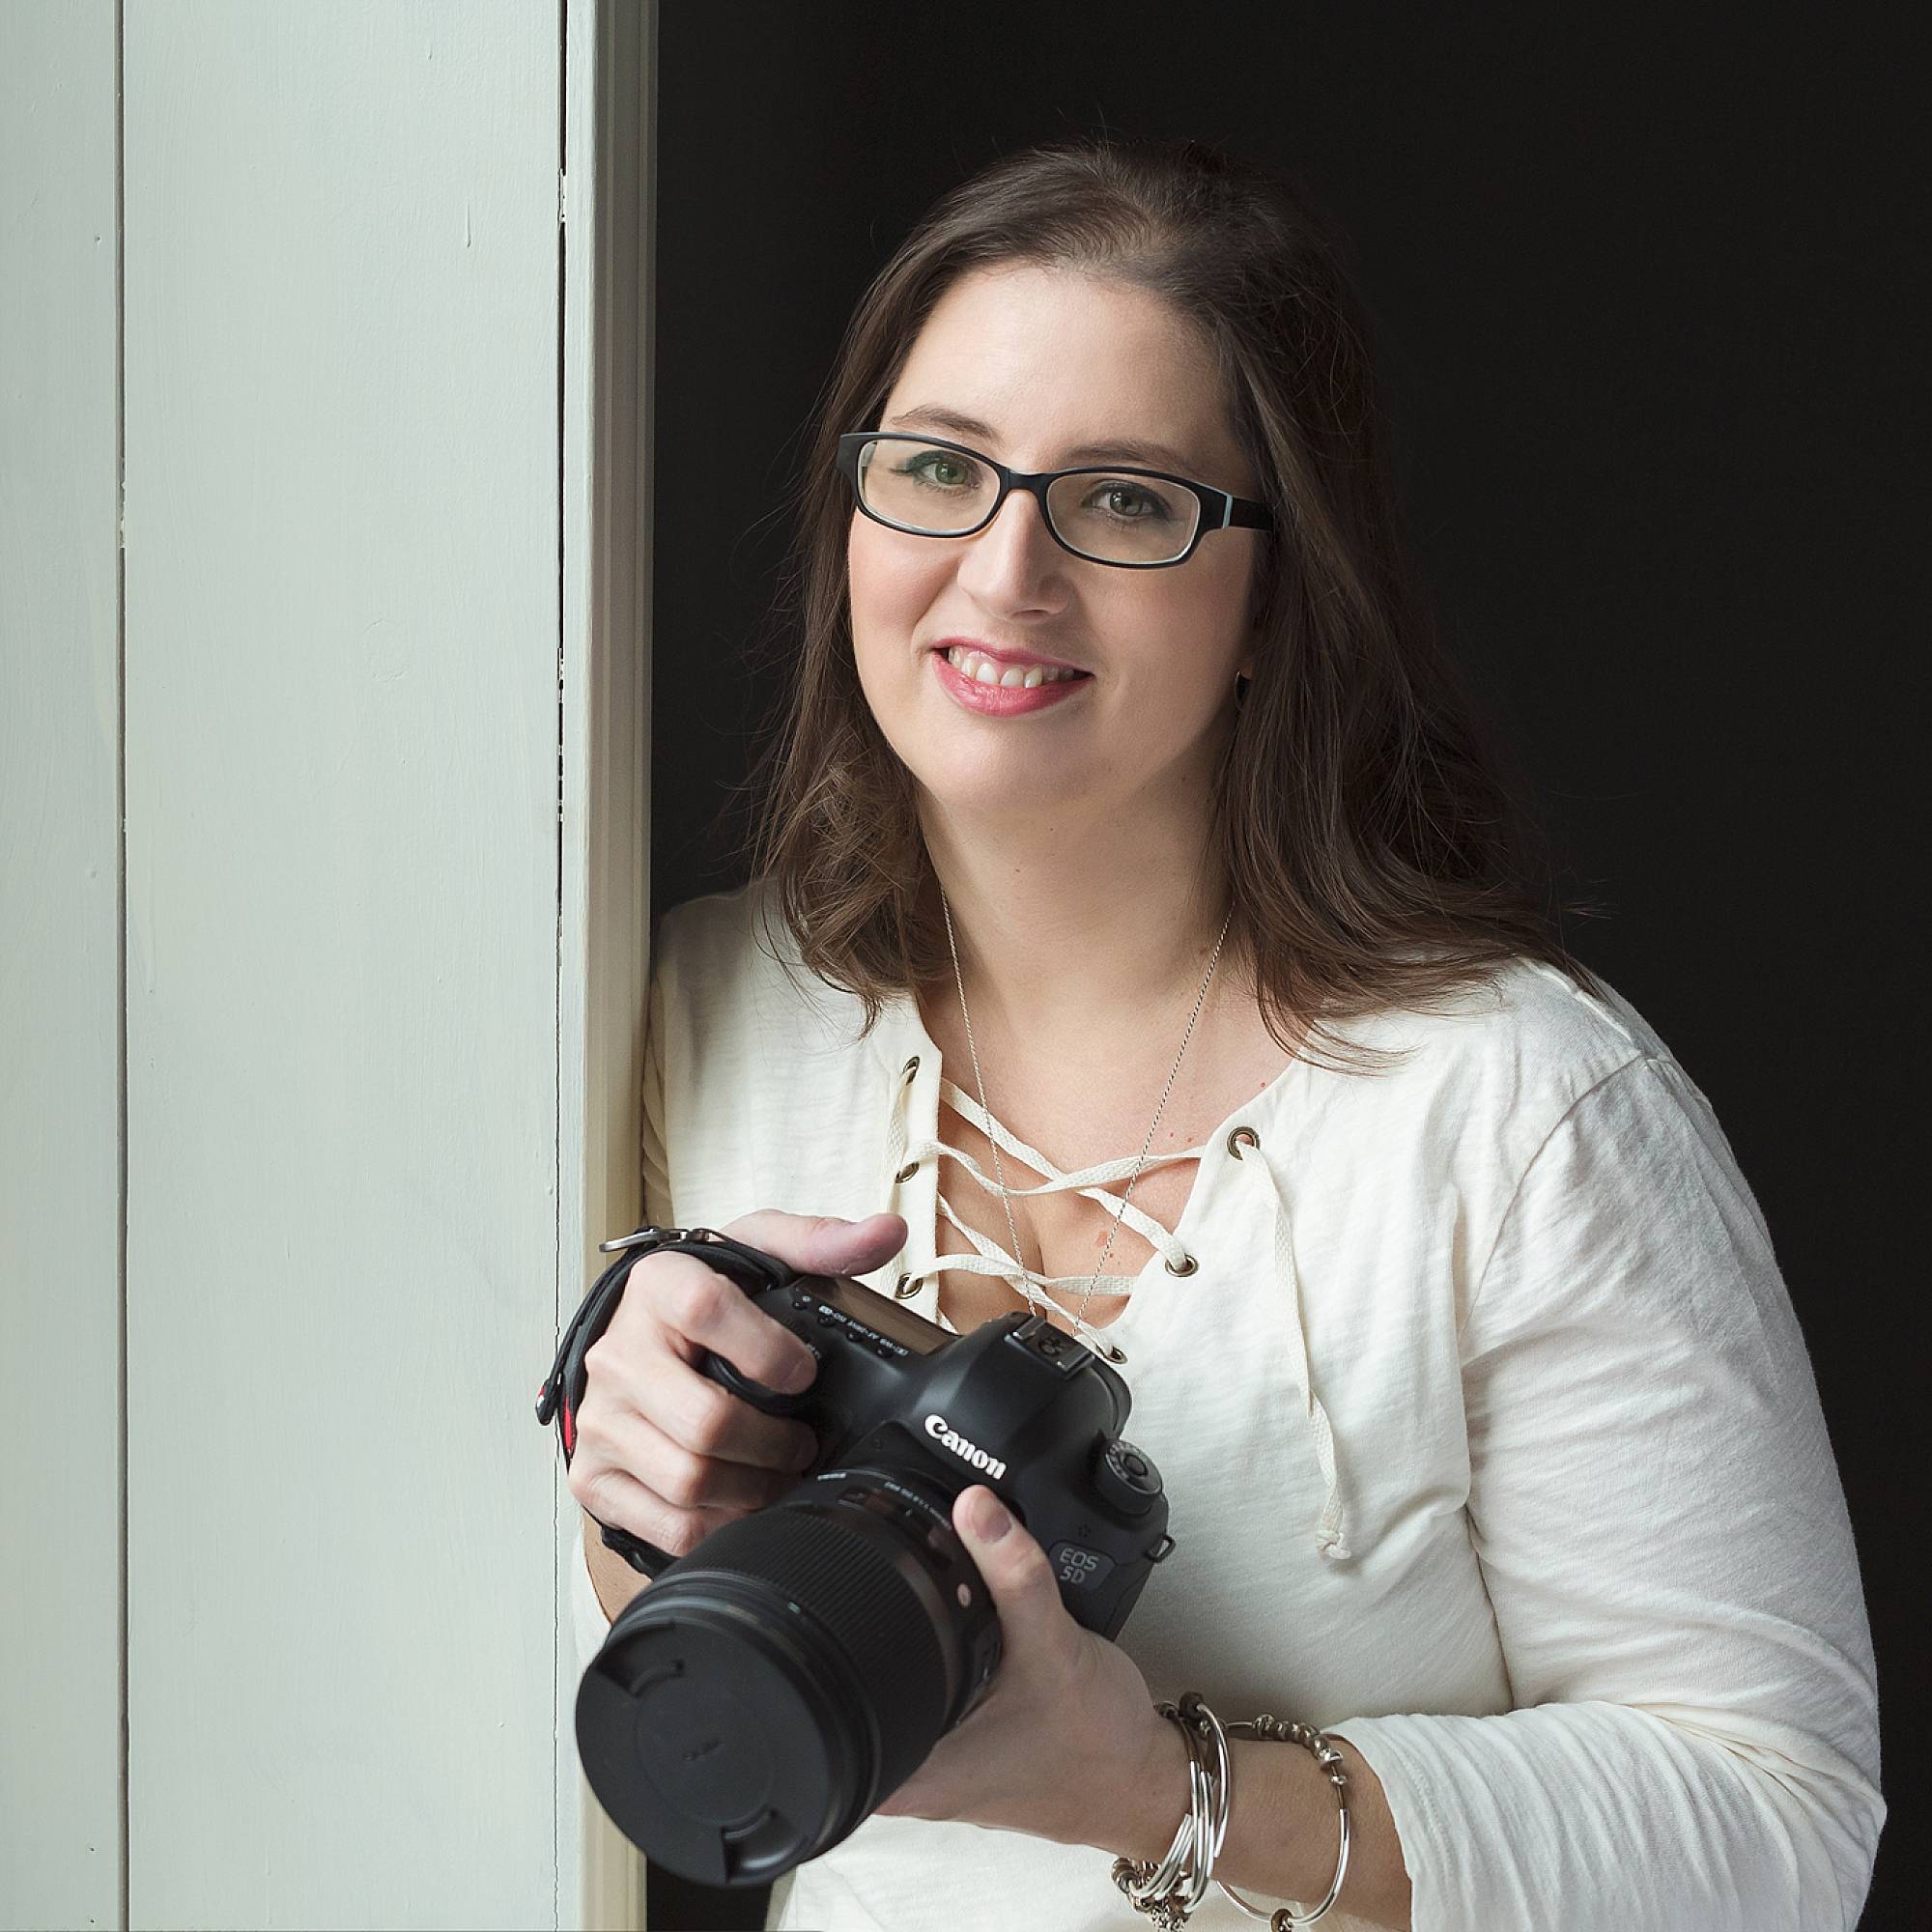 image of photographer, Jodi Walsh. She's leaning next to a doorway, wearing a white top and holding her camera. She's wearing dark frame glasses and is smiling.